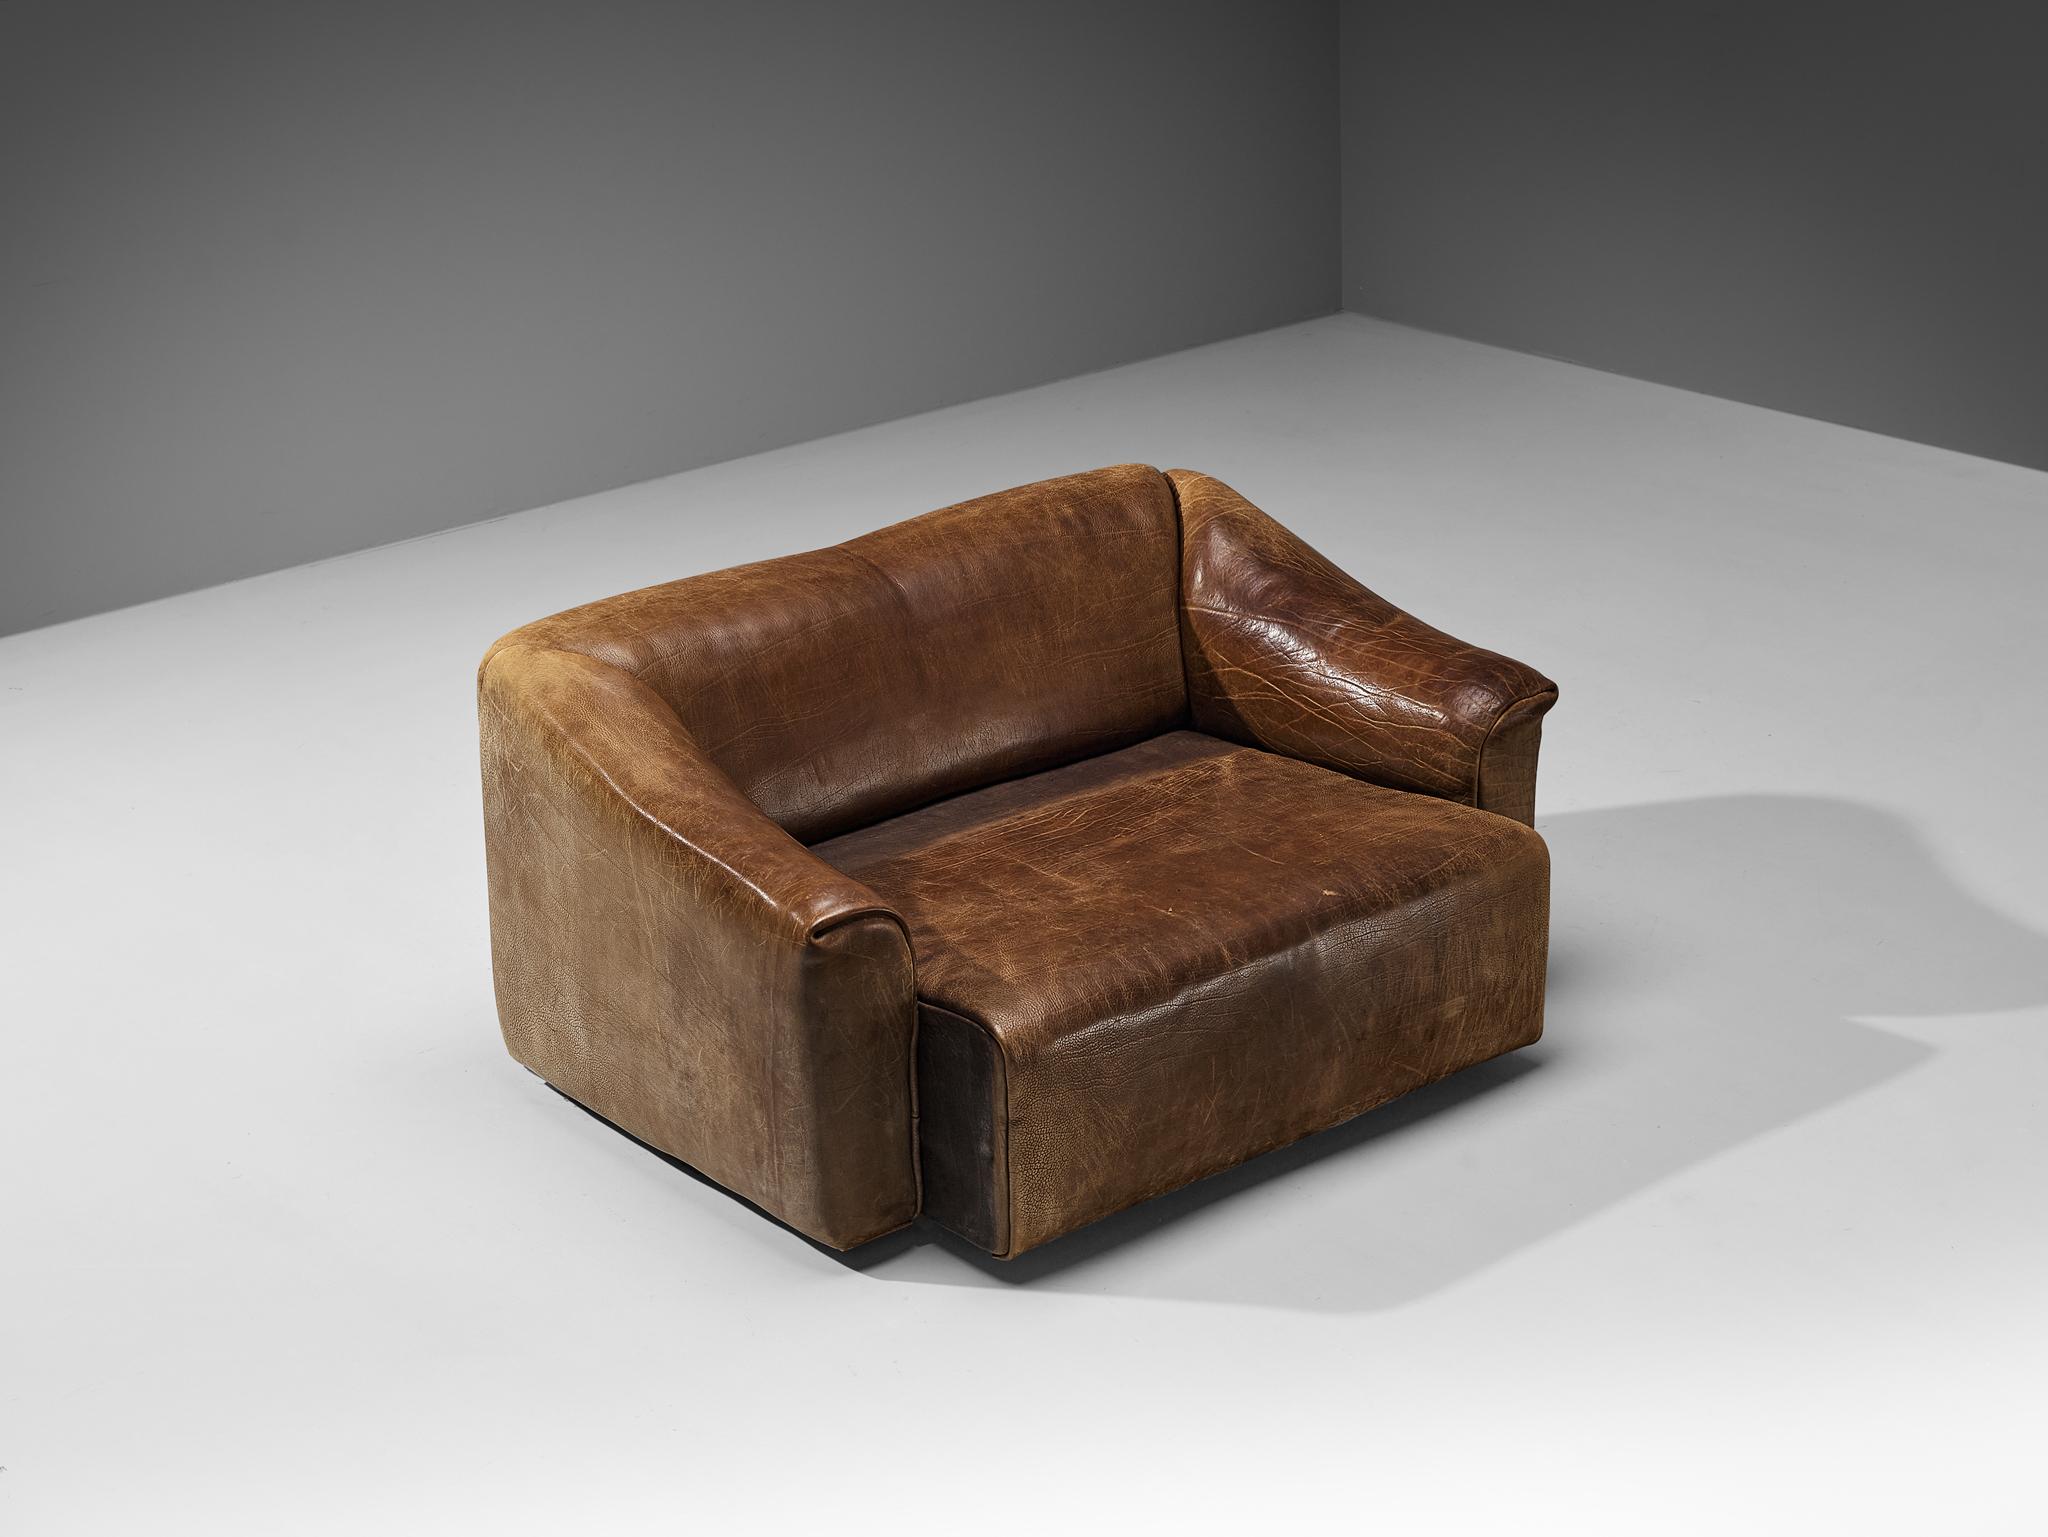 De Sede, DS-47 two-seat sofa, leather, Switzerland, 1960s.

Highly comfortable DS47 sofa in a patinated cognac leather by De Sede. The design is simplistic, yet very modern. This design is slightly curved in its form, which emphasizes the